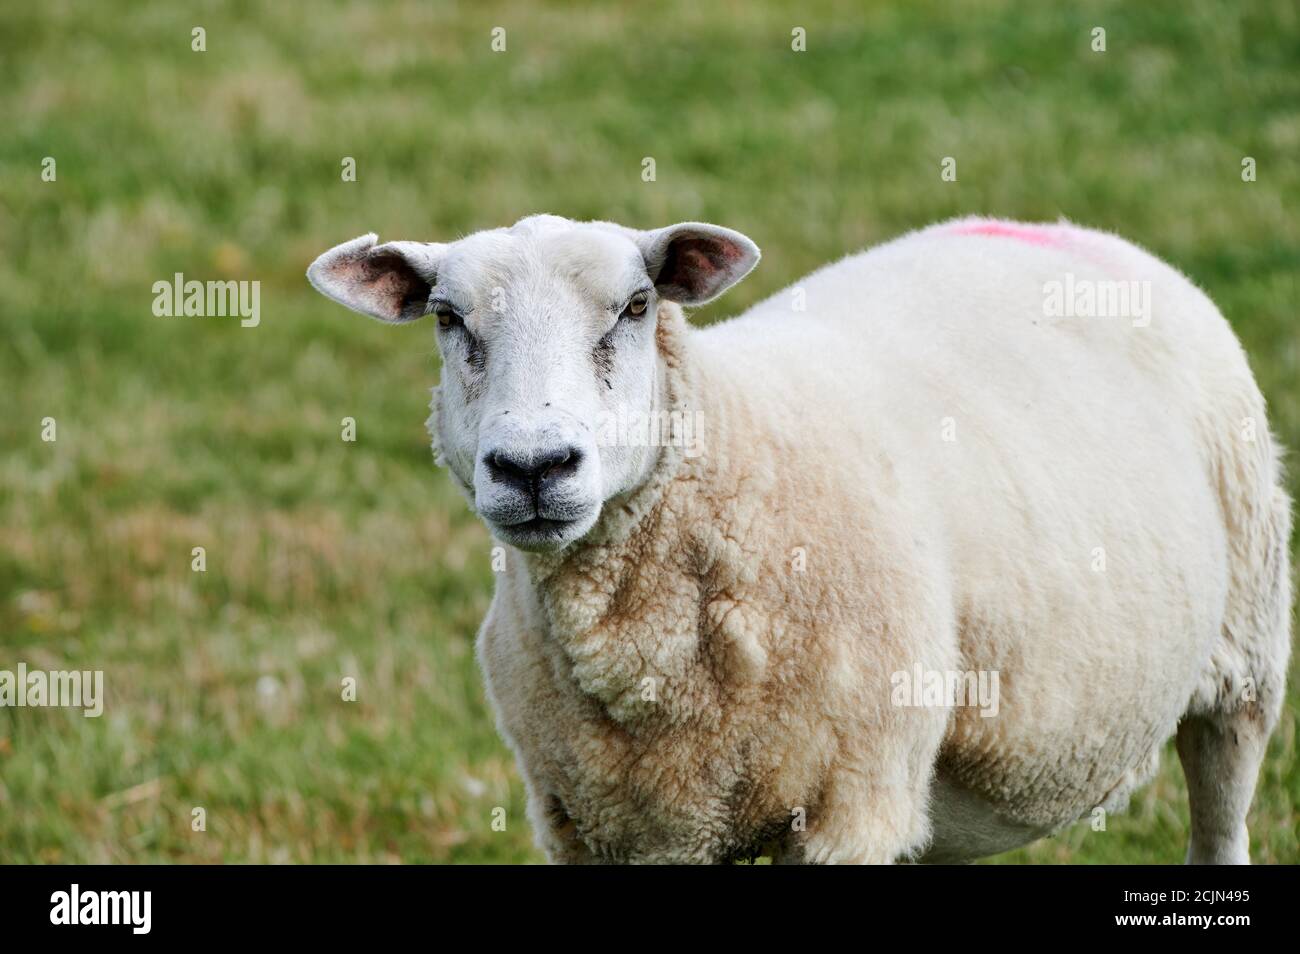 Sheep looks intently at the camera Stock Photo